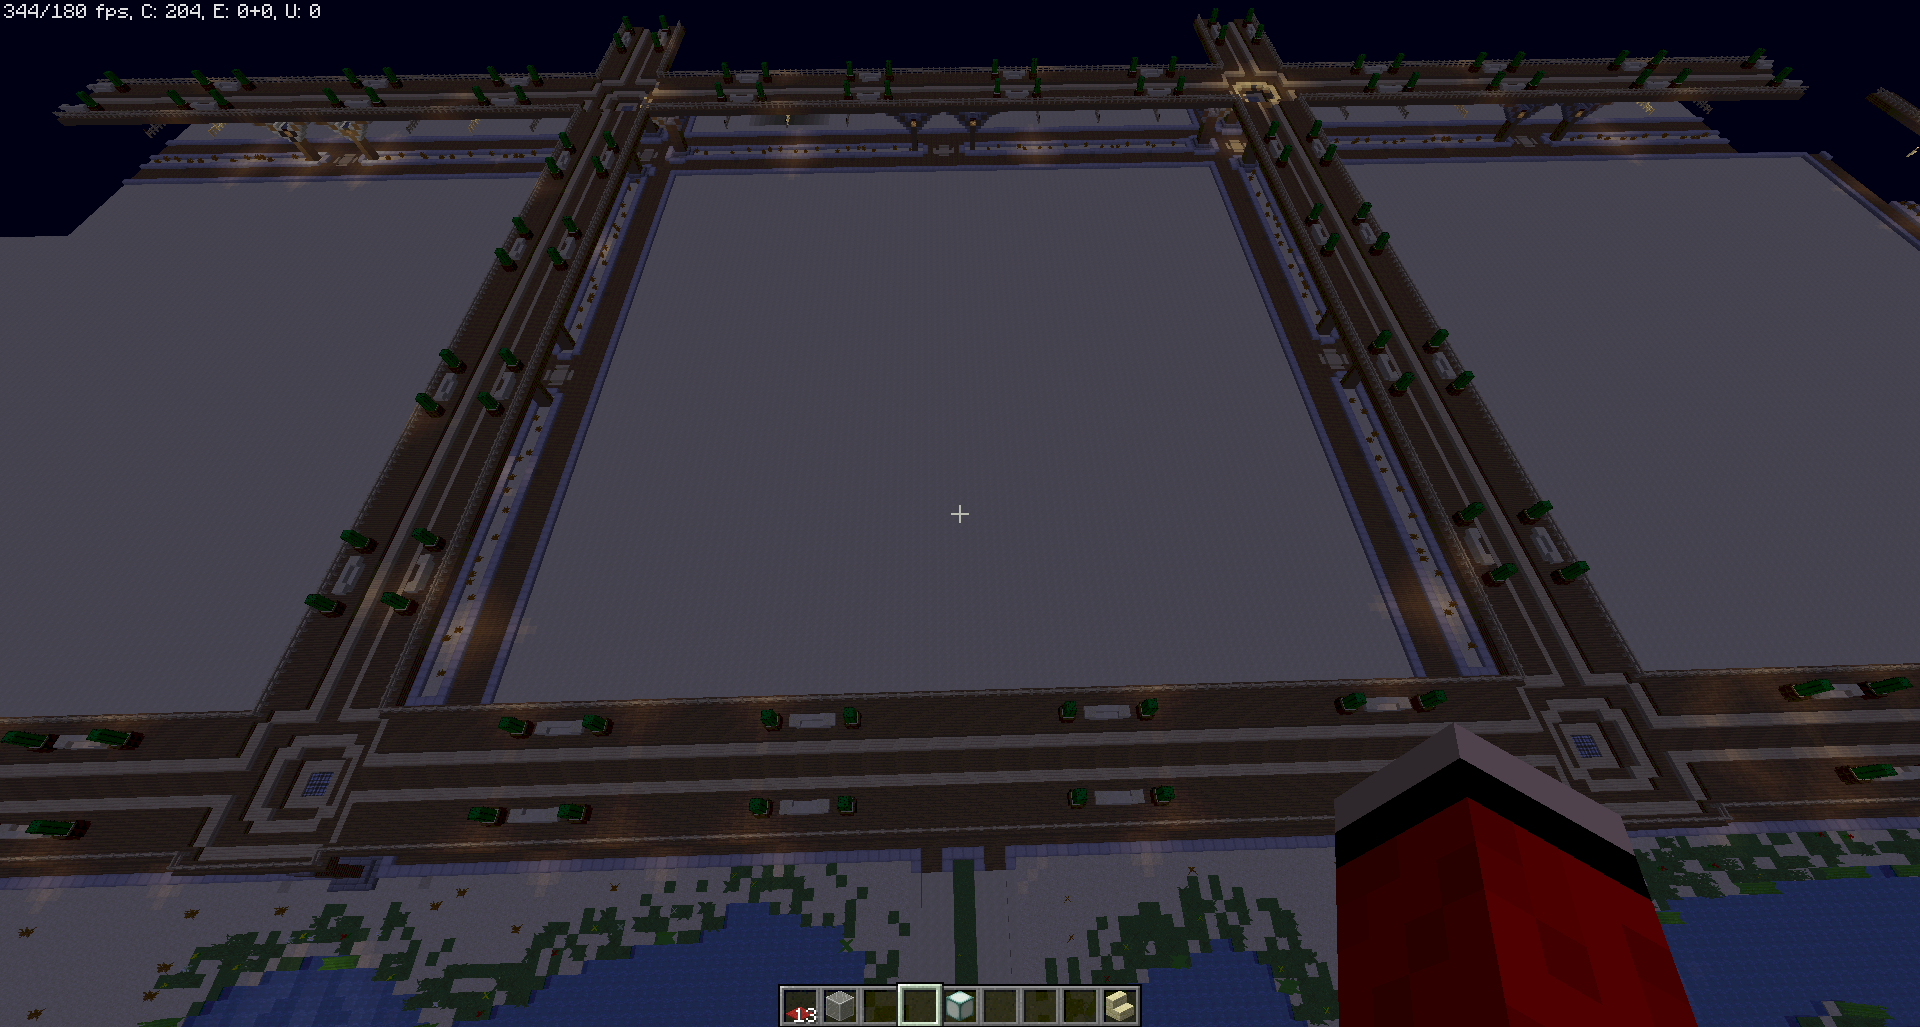 Minecraft Server - PlotSquared - 1.13.2 Vll. Does anyone know what you can do there